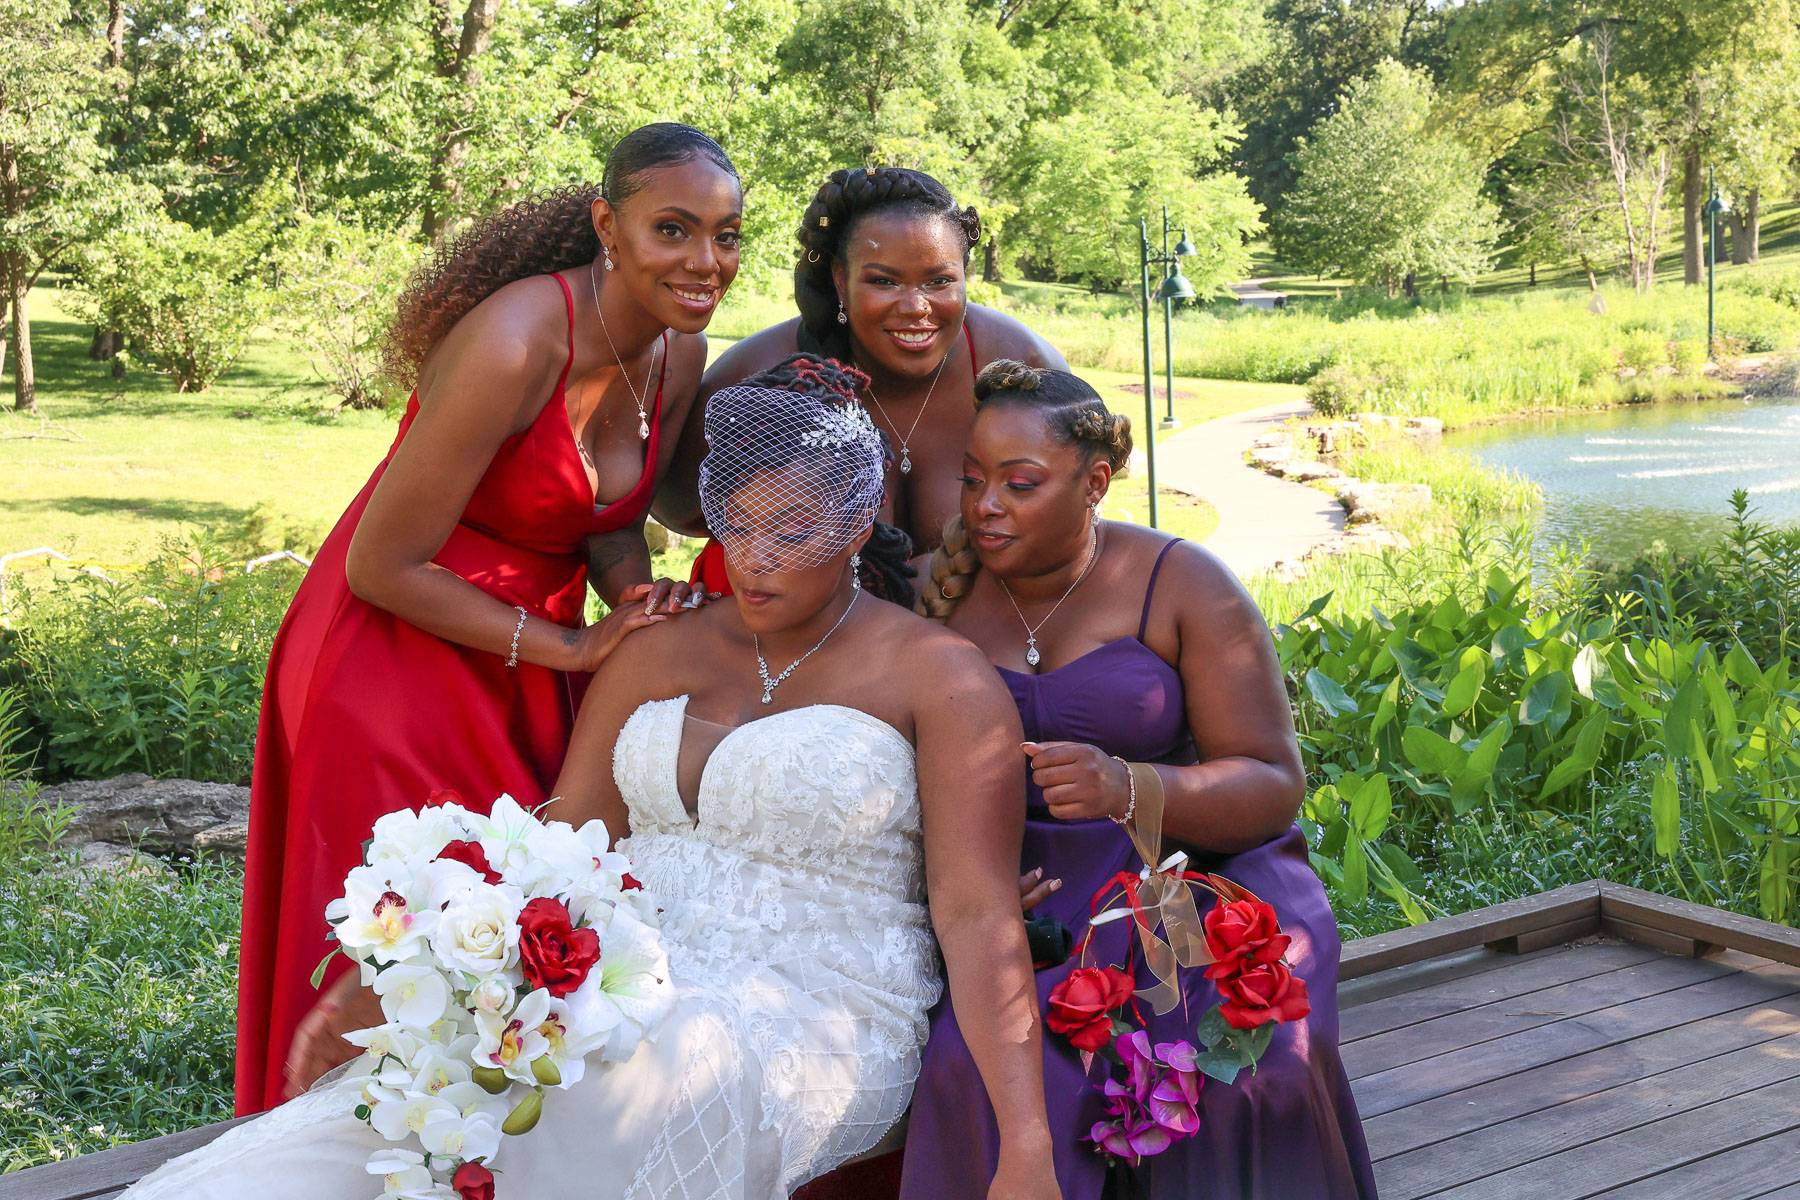 The bride and her attendants close to each other